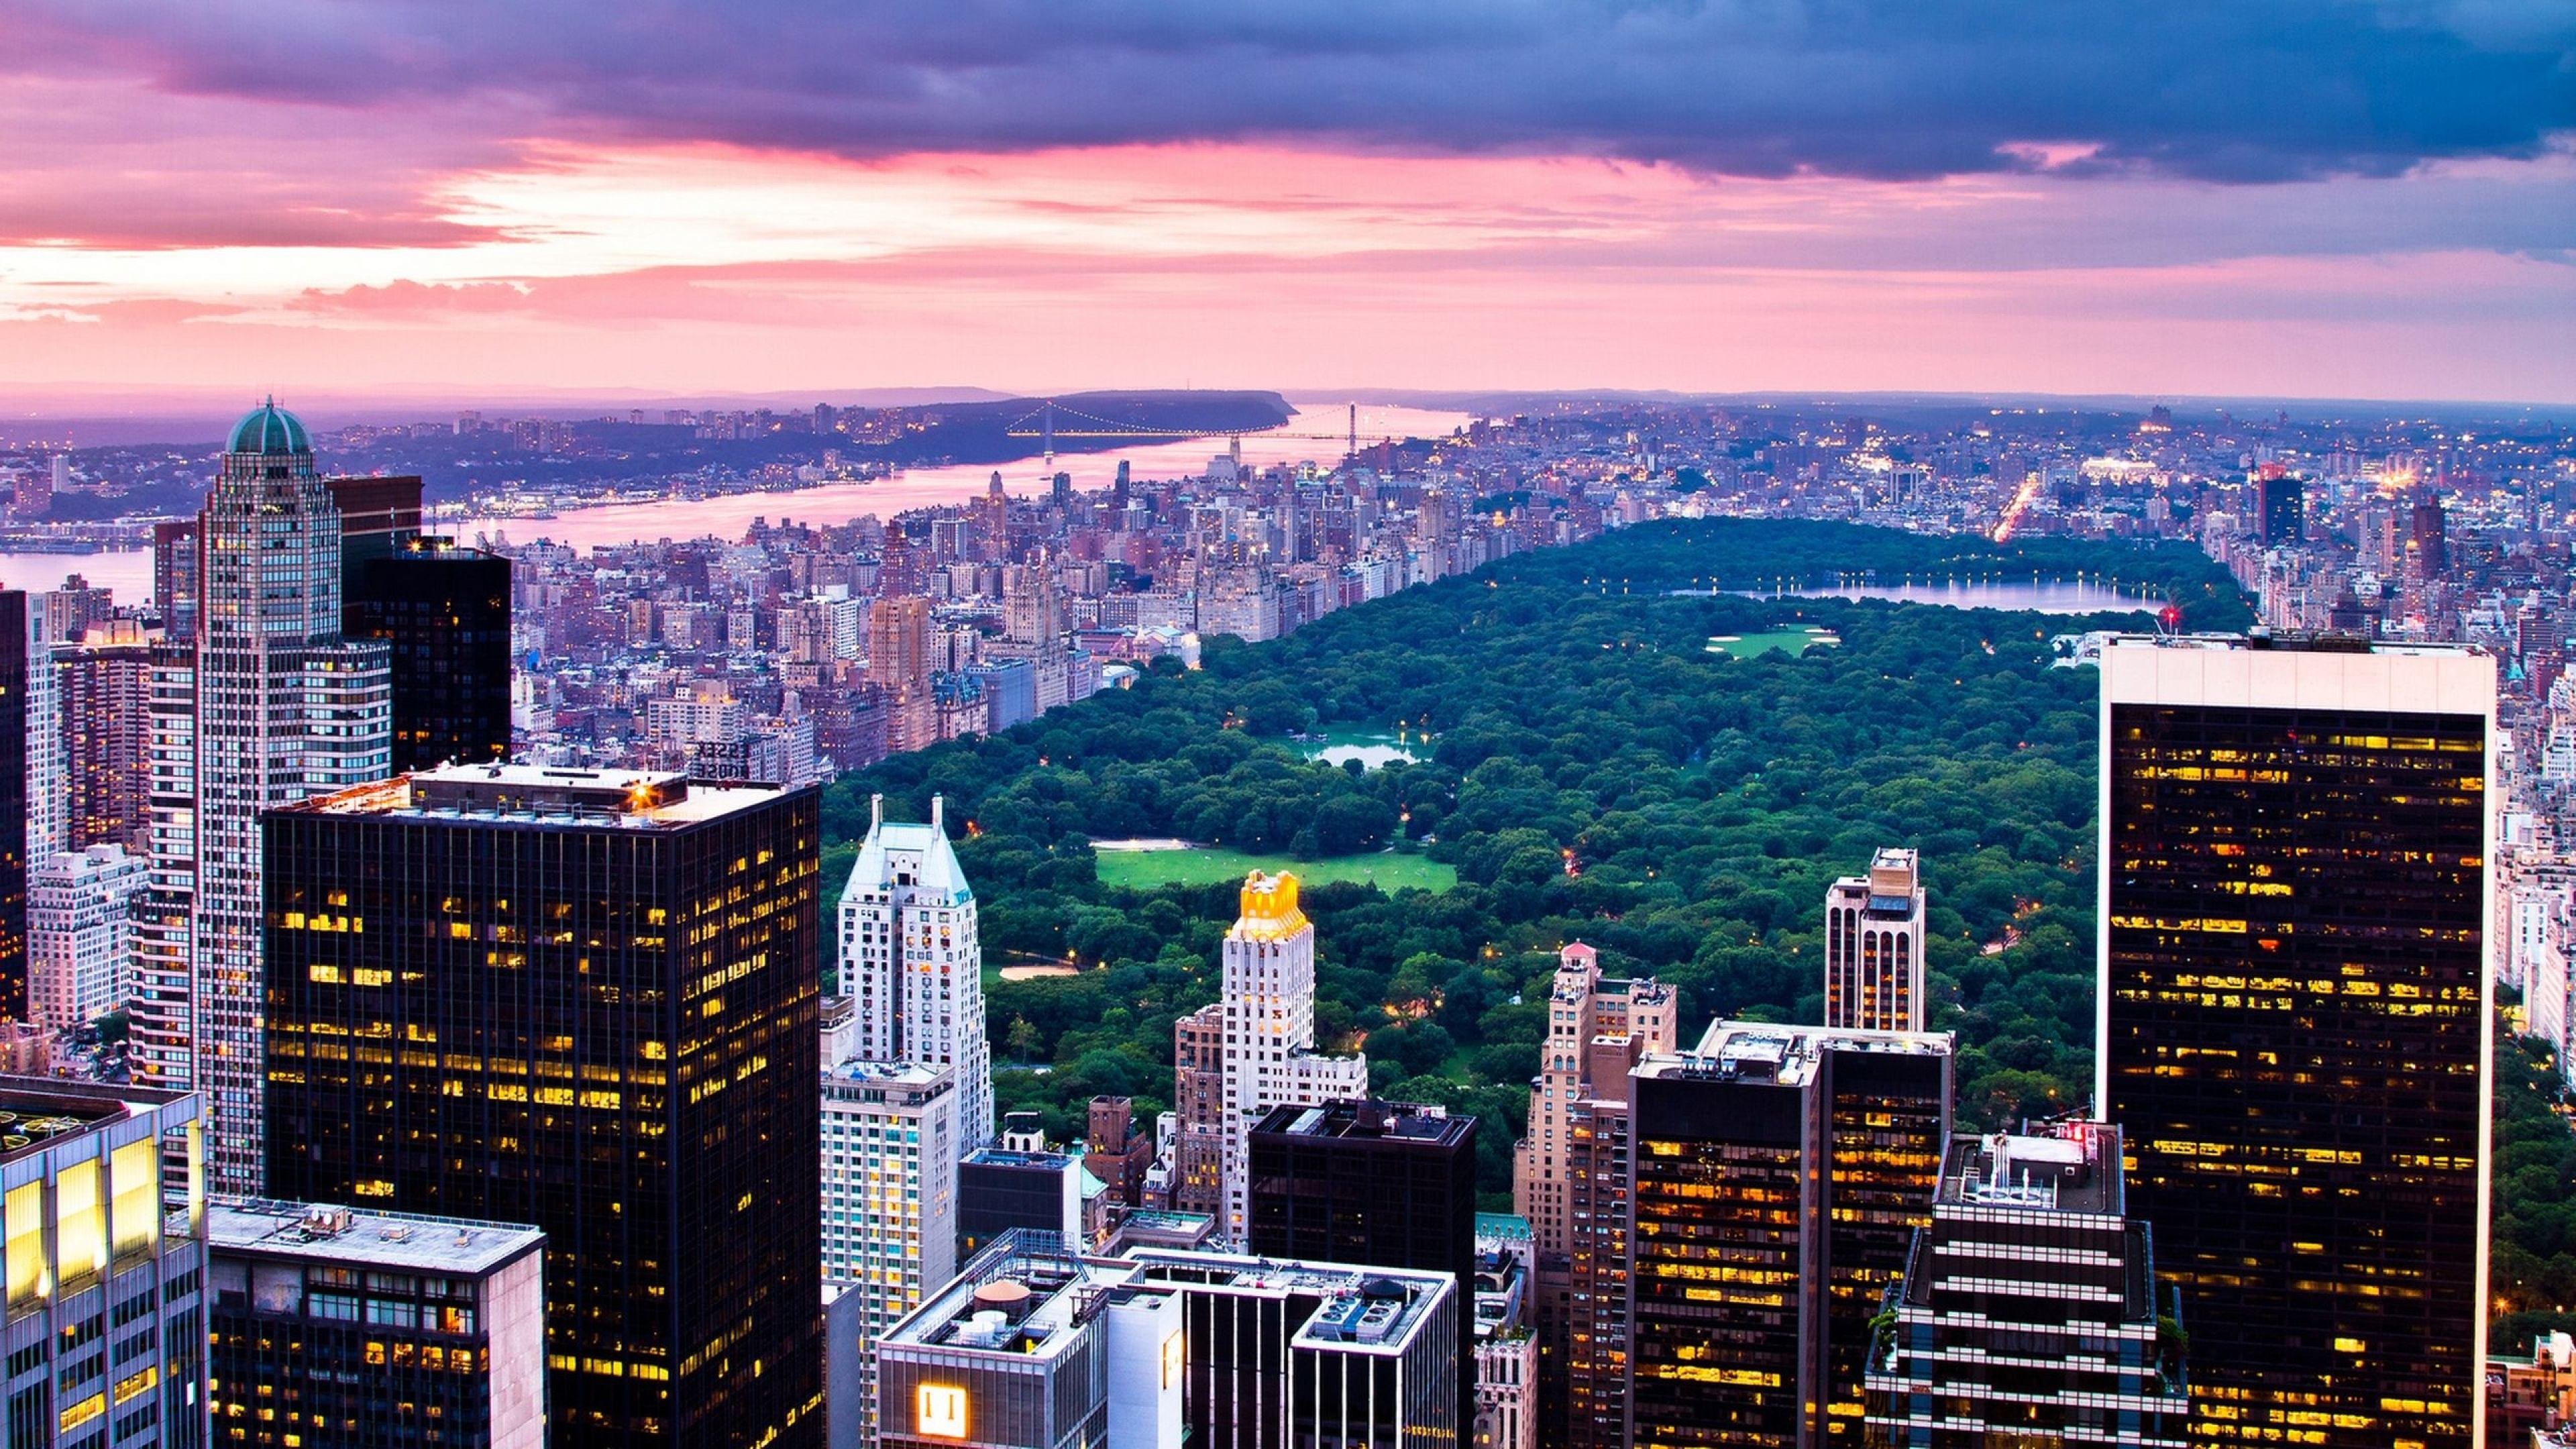 New York: Central Park, Located between the Upper West and Upper East Sides of Manhattan. 3840x2160 4K Wallpaper.